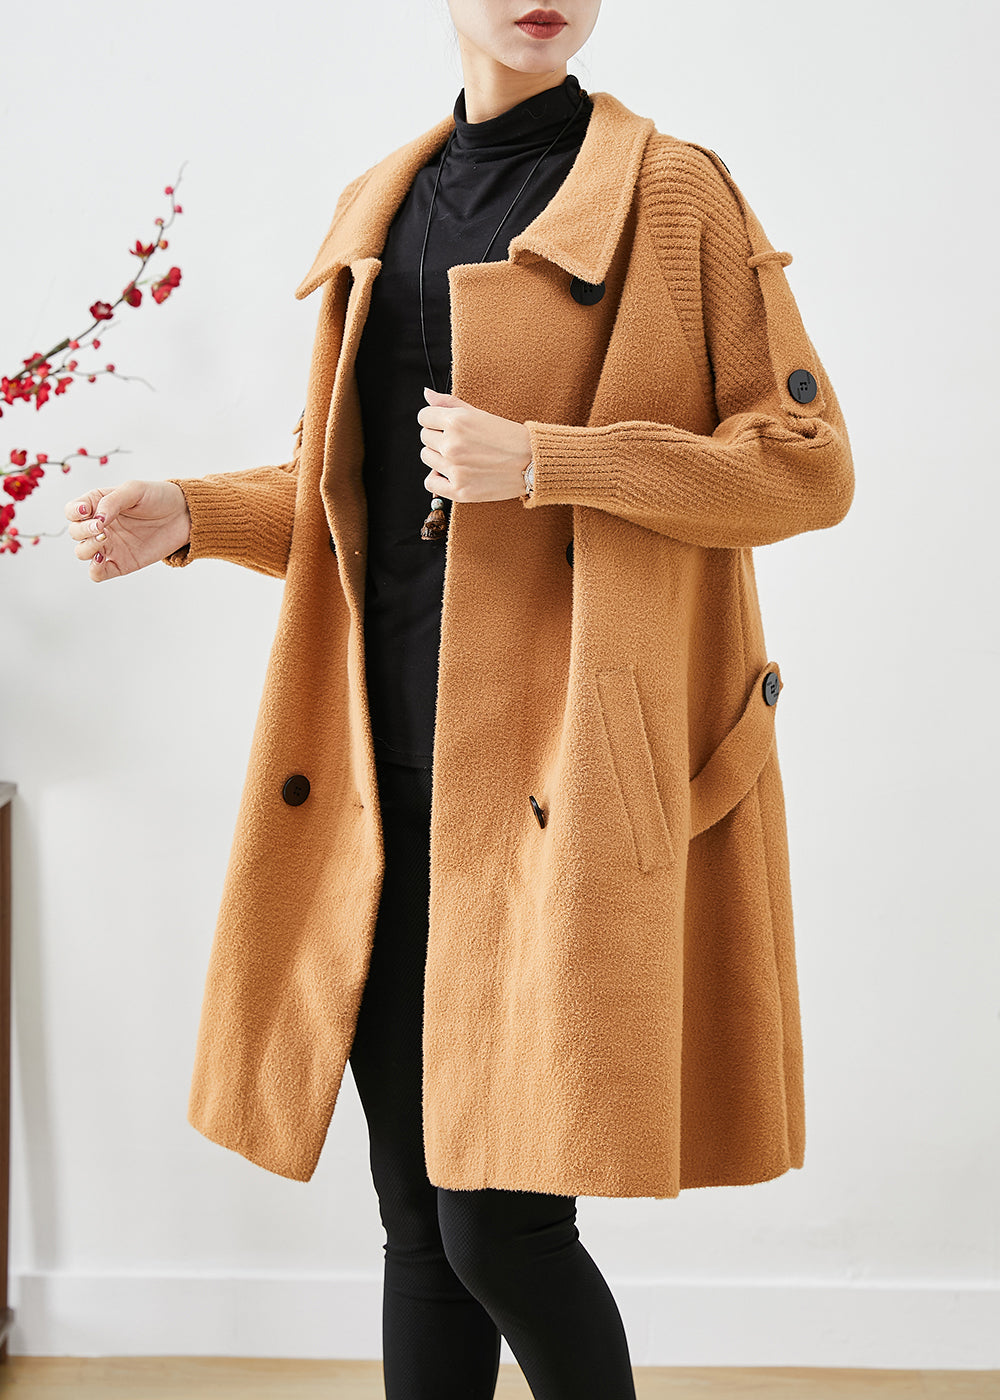 Boho Light Camel Double Breast Patchwork Knit Woolen Trench Coats Fall Ada Fashion